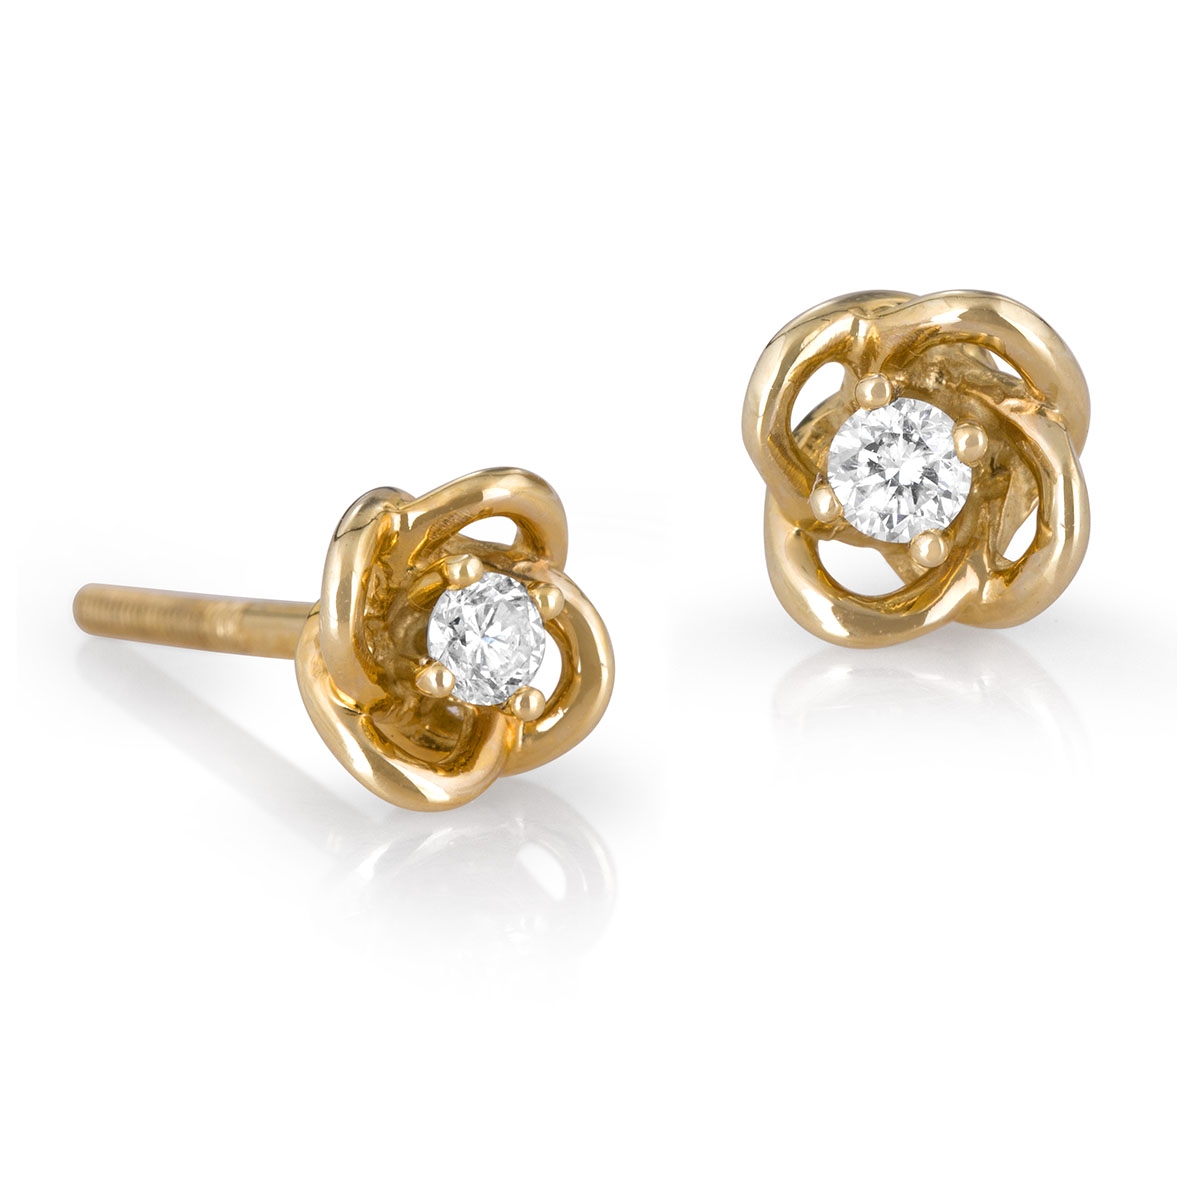 14K Gold 4-Pronged Diamond Stud Earrings With Chic Knotted Design (Choice  of Color), Jewelry | Judaica Webstore